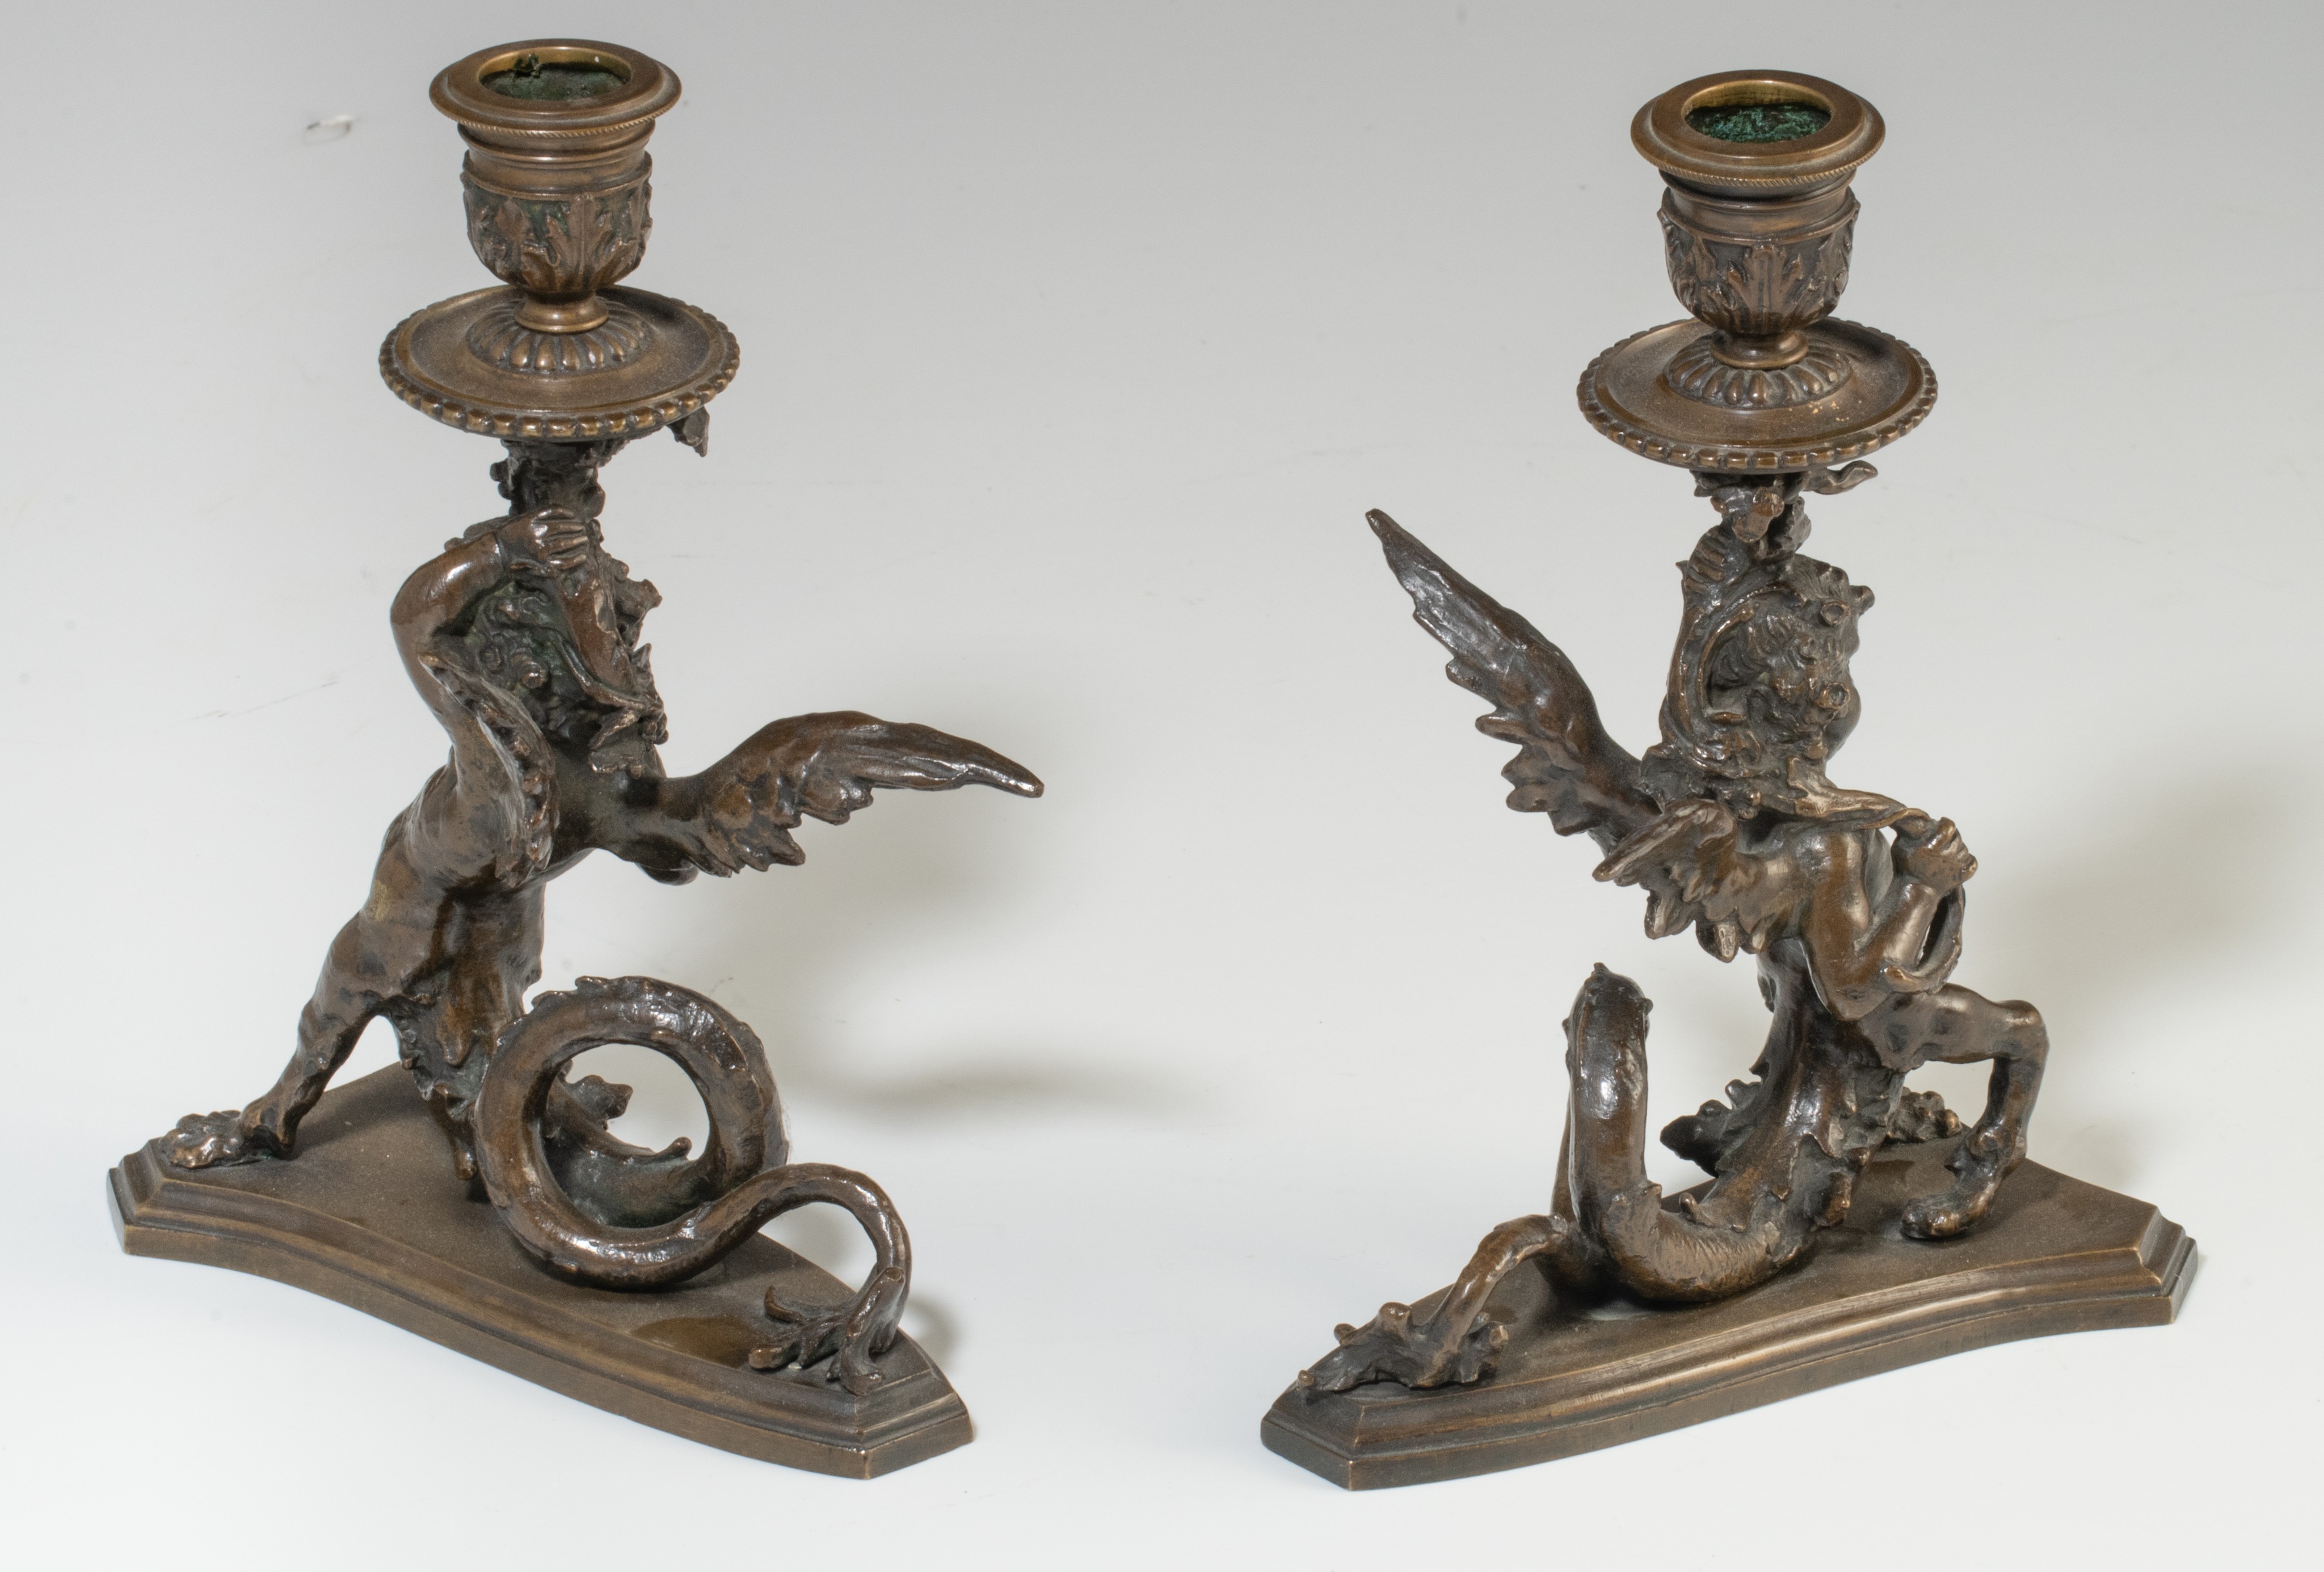 A Rococo style mantle clock with Cupid on his chariot and a pair of matching candlesticks, H 19,5 - - Image 9 of 9